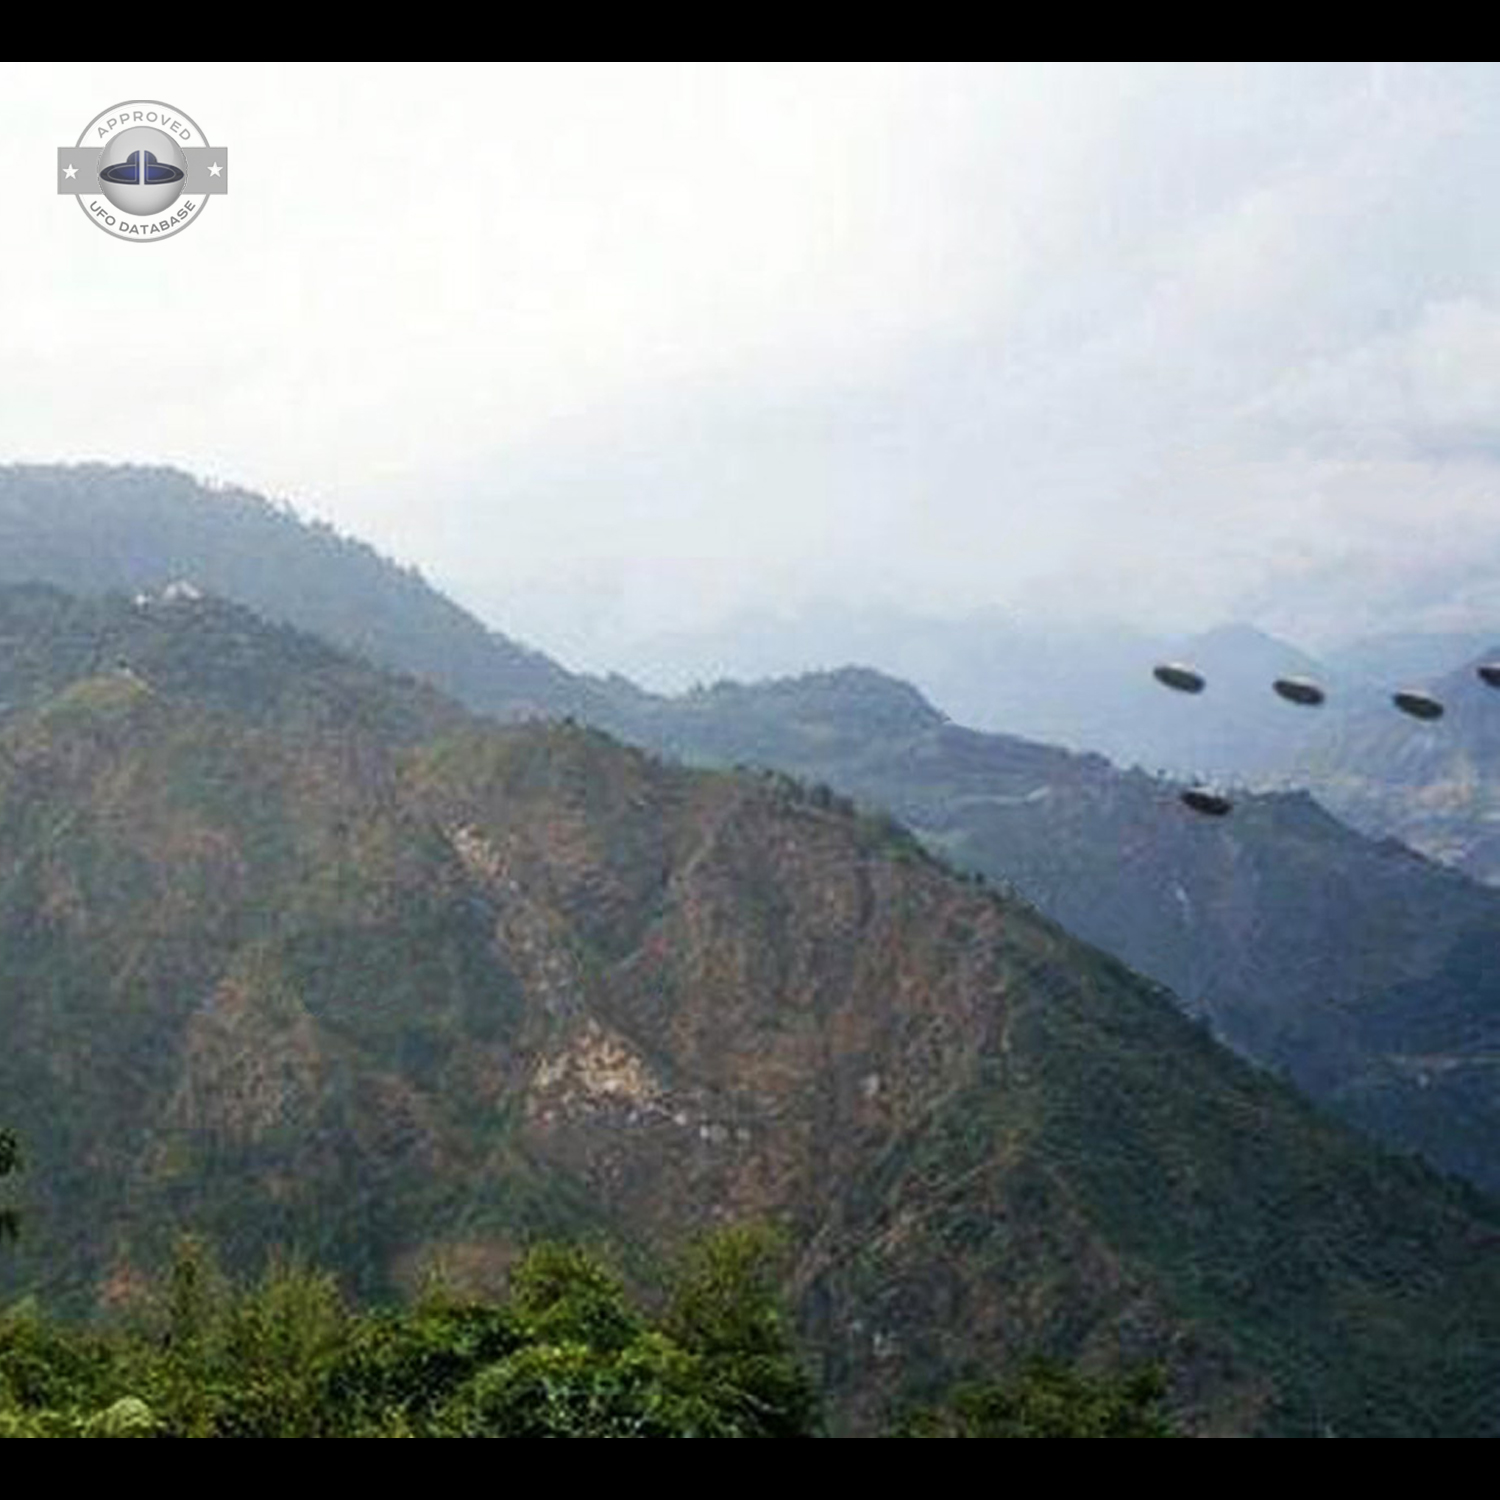 Fleet of 5 UFOs flying in precise formation Hills of Sombaria Gangtok UFO Picture #202-2